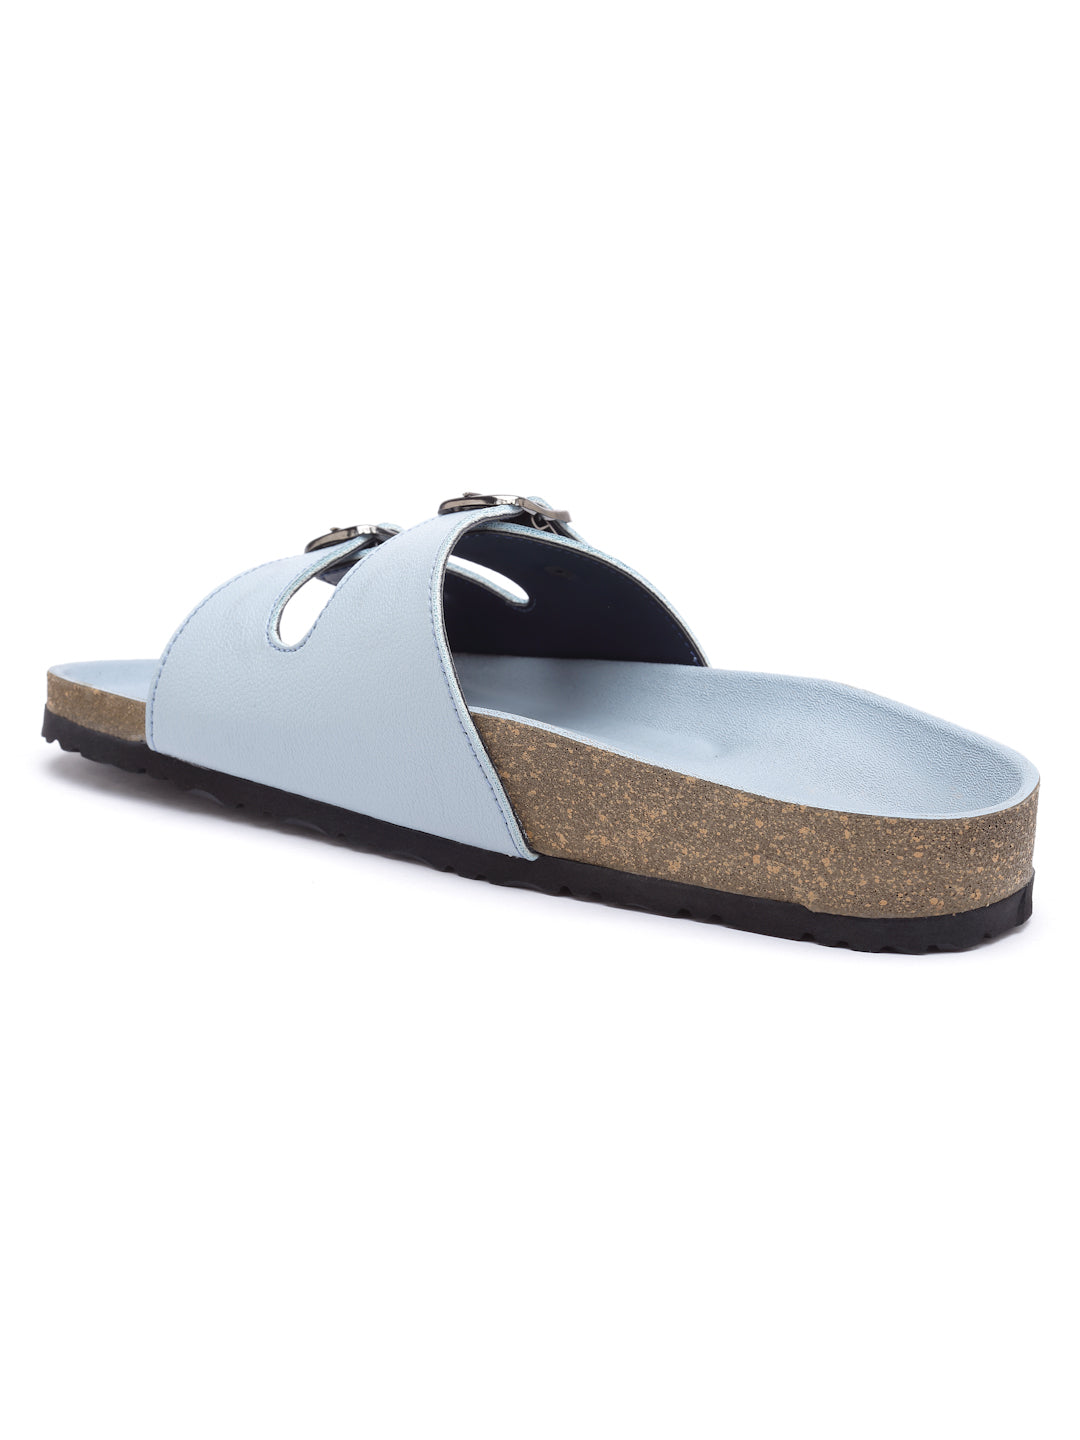 Women's Powder-Blue Synthetic Leather Casual Sandal